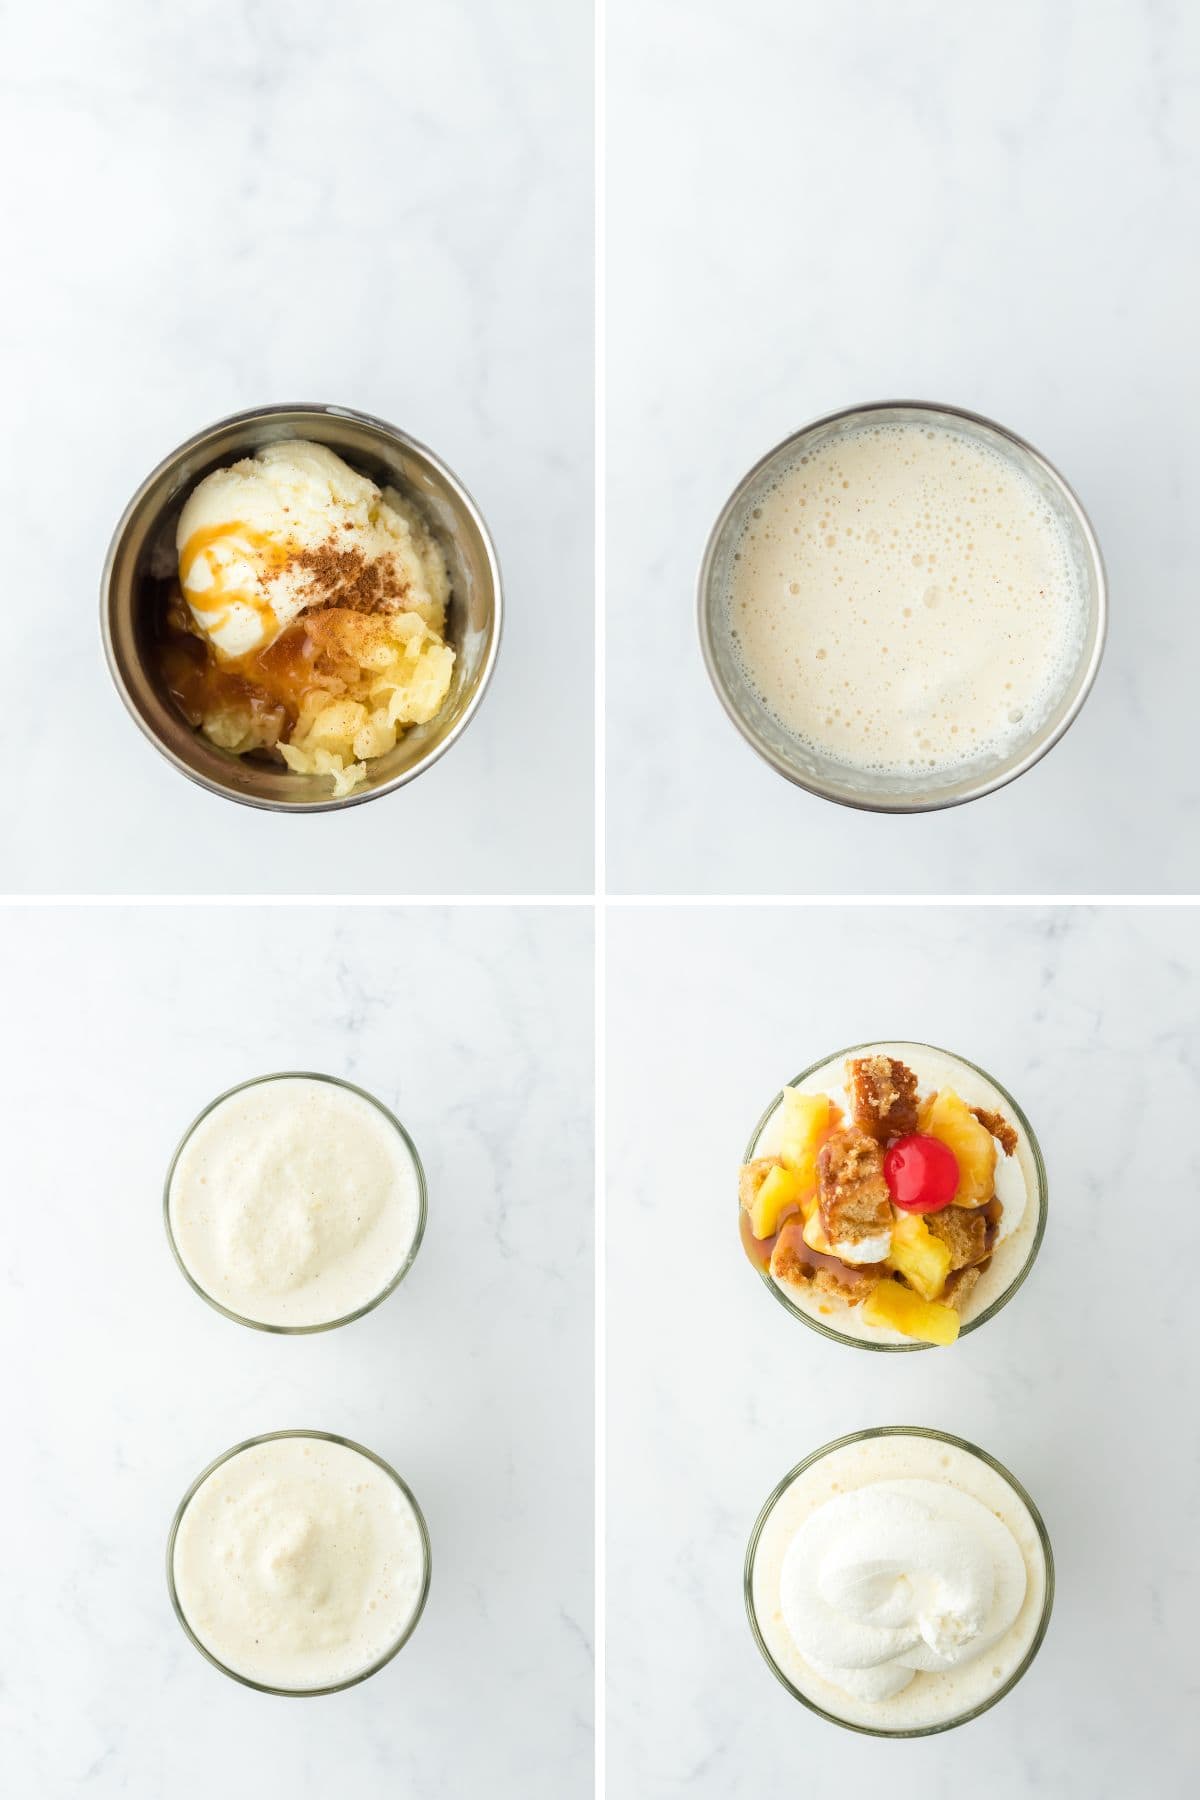 A collage of images showing the steps for making a pineapple shake.